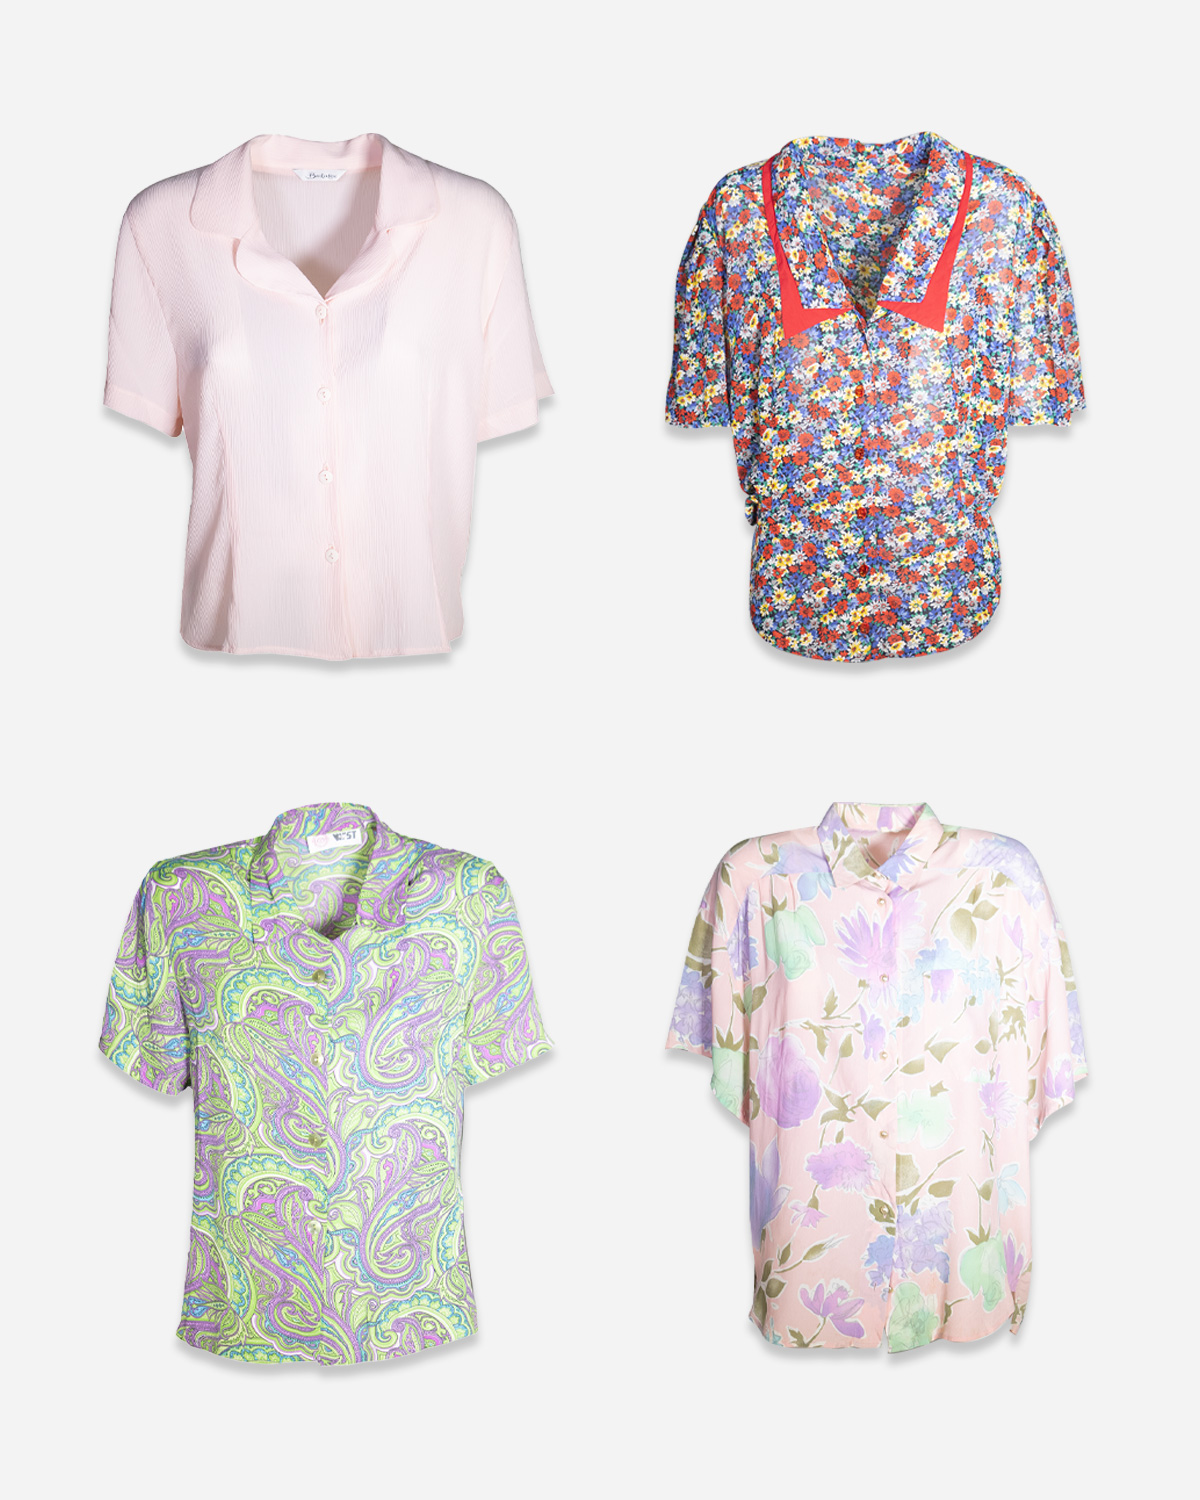 Women's 90s colored short sleeves shirts: 4 pieces